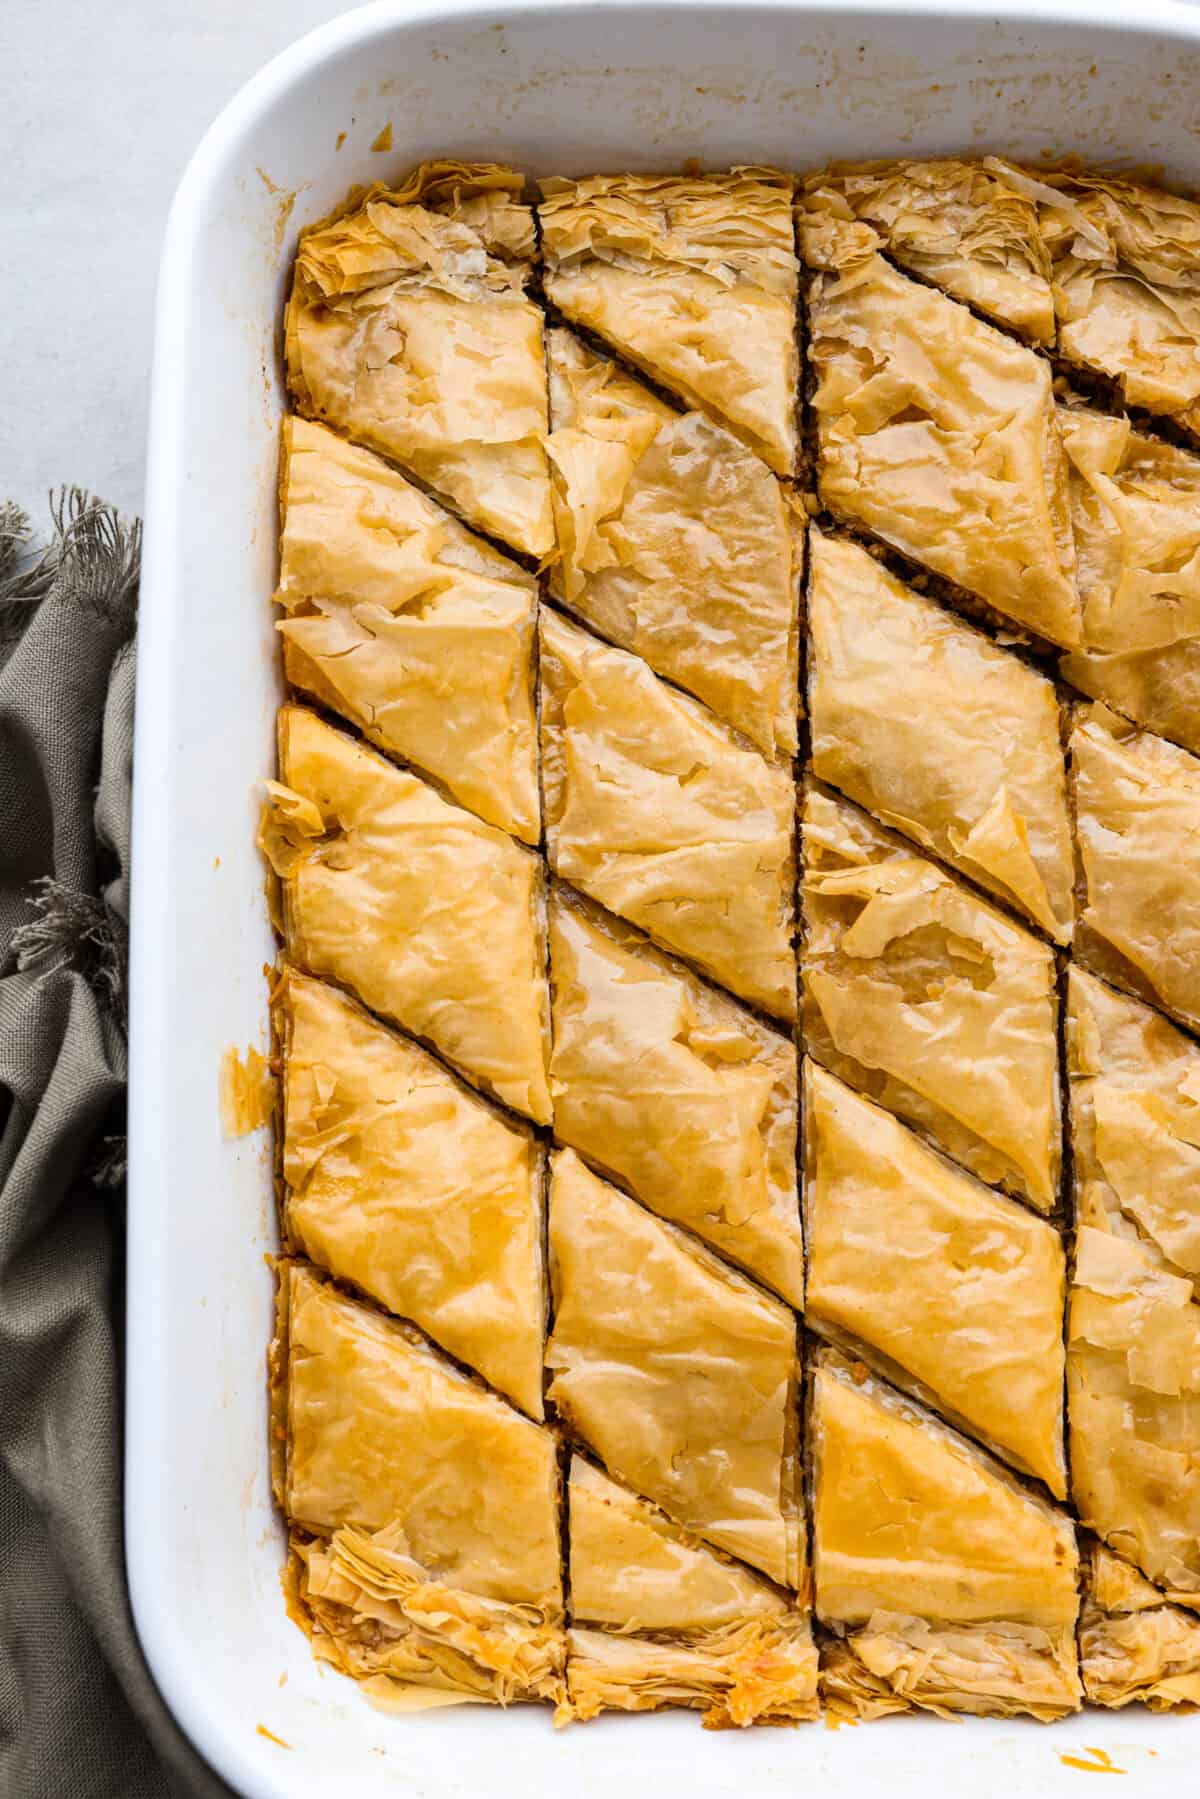 Top-down view of baklava in a white baking dish.